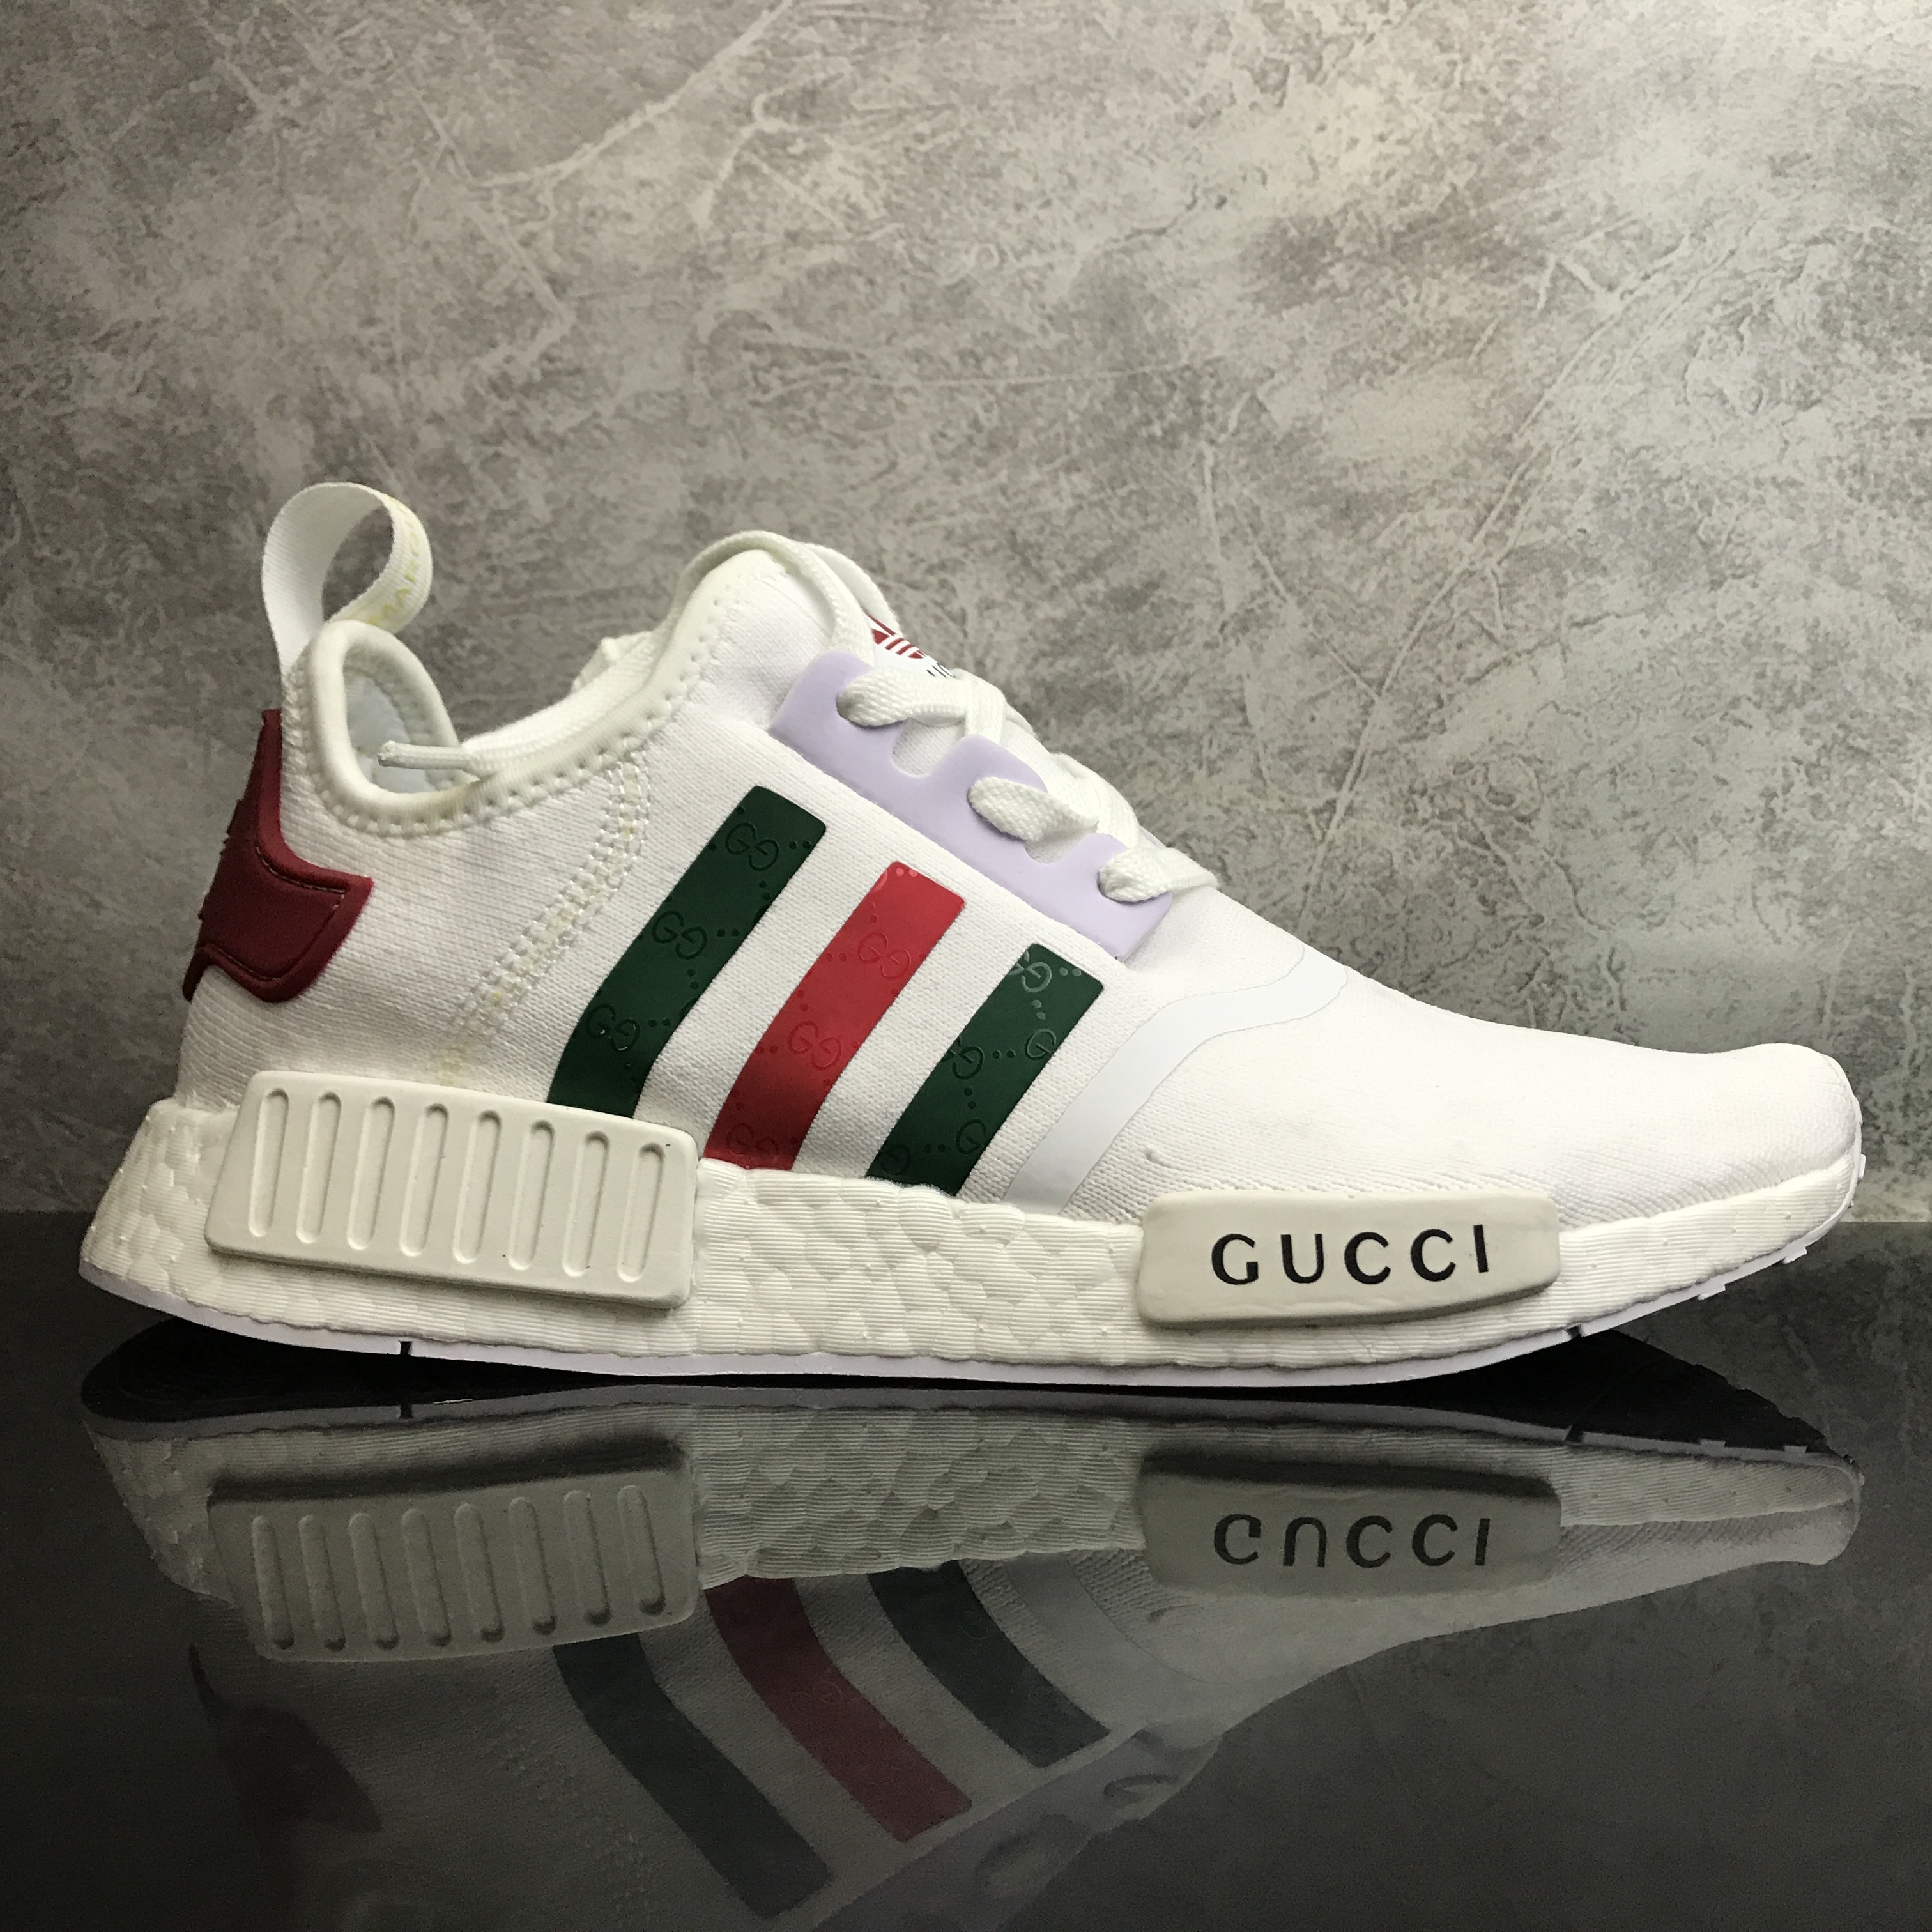 Adidas NMD Custom Gucci White Real Boost Unboxing